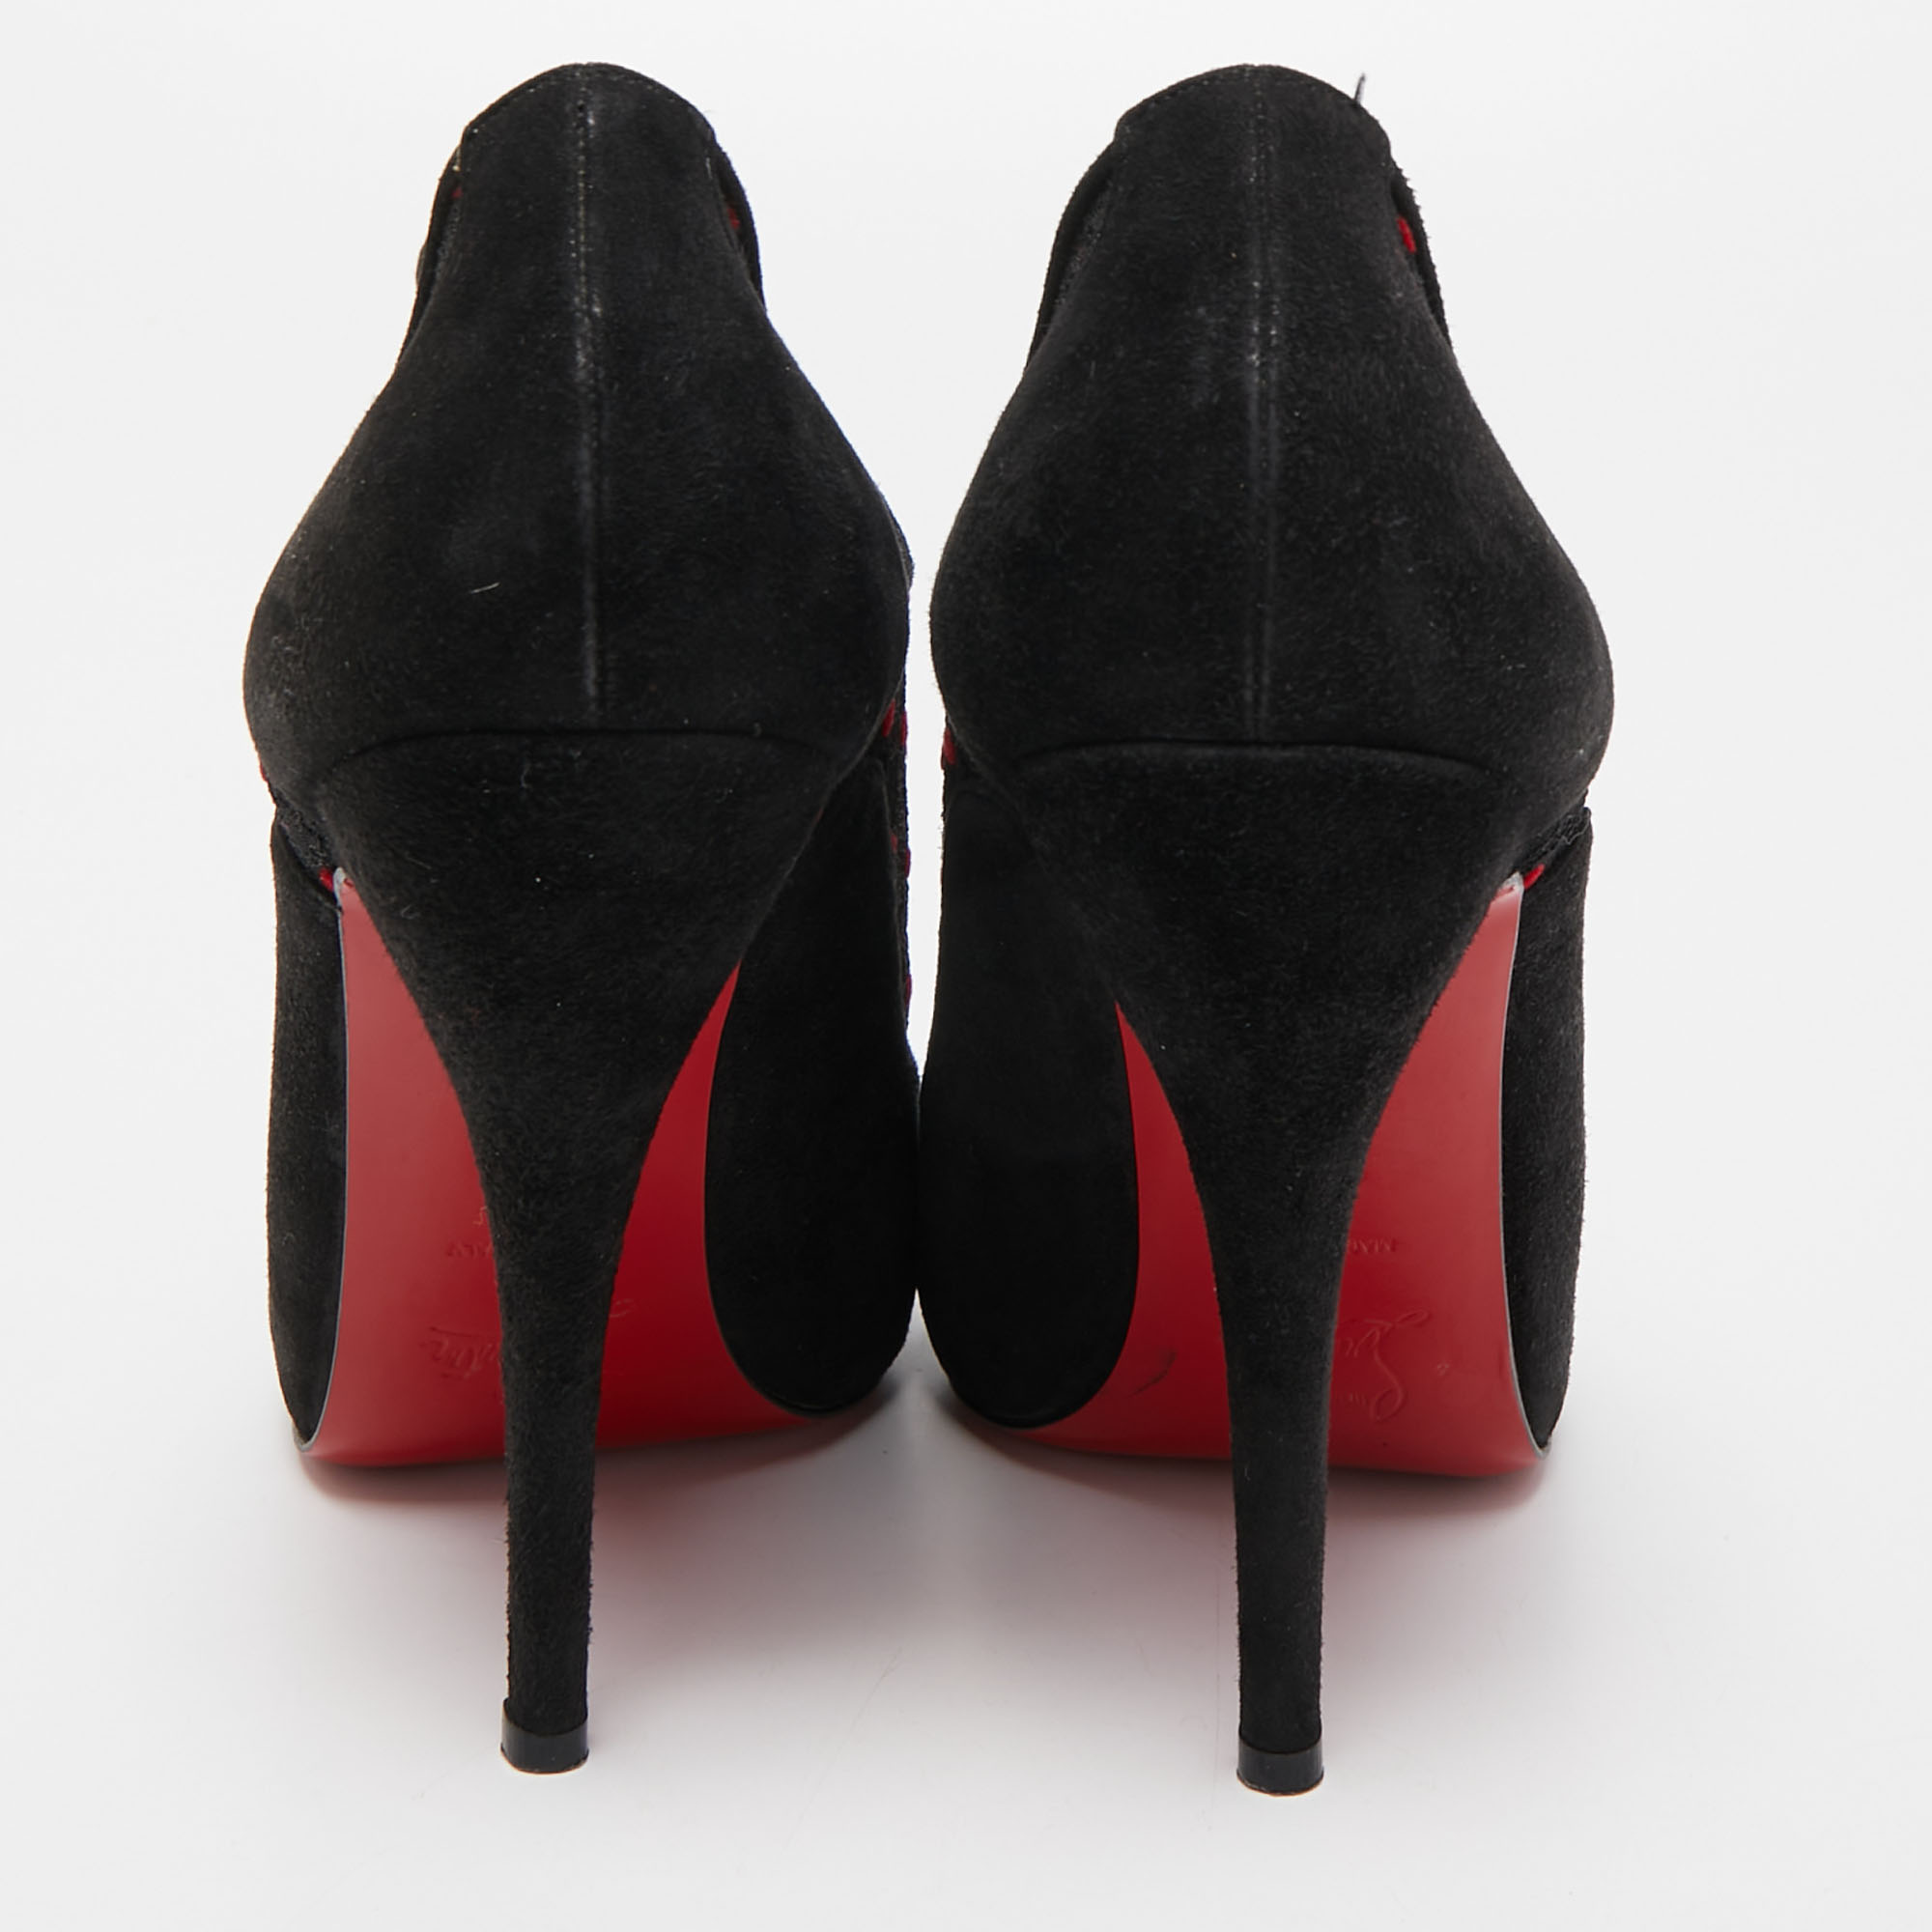 Christian Louboutin Black Suede And Mesh Peep Toe Platform Ankle Booties Size 38.5